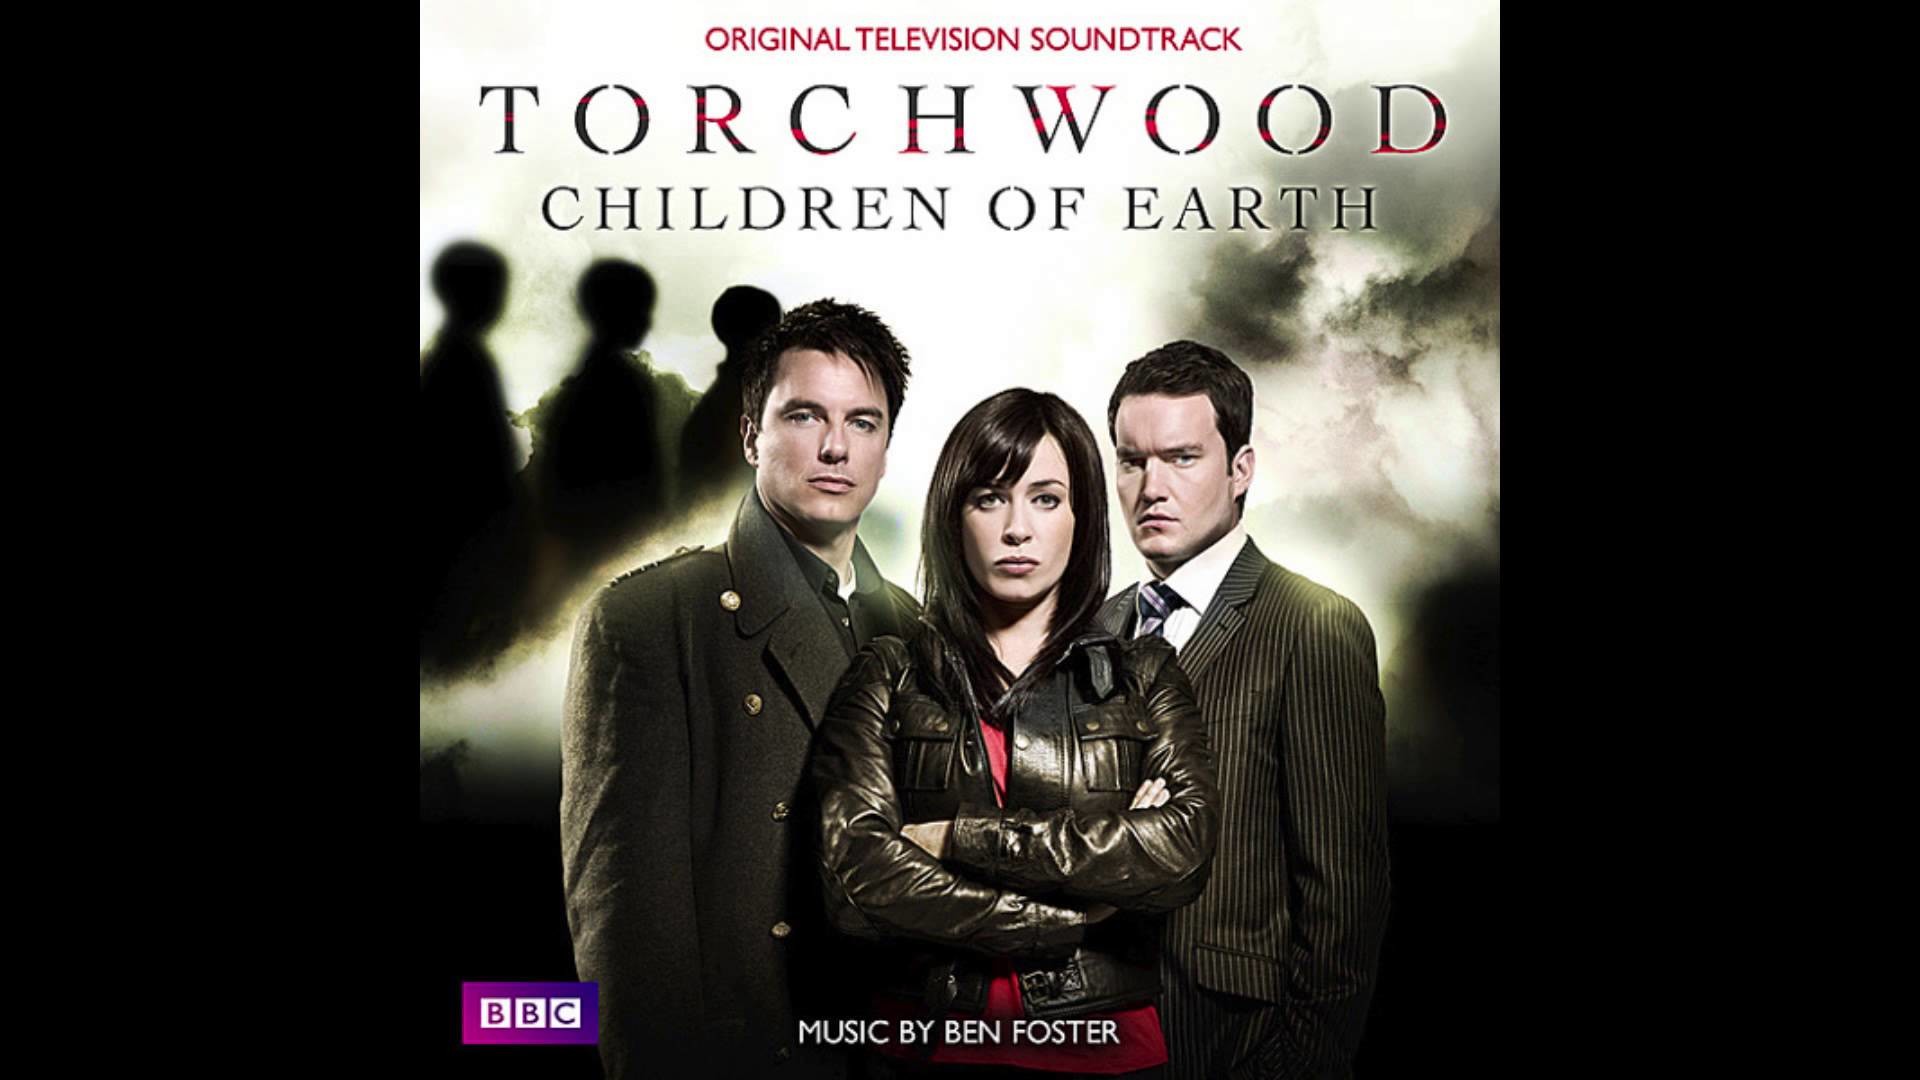 1920x1080 Torchwood Series 3: Children of Earth Soundtrack - 10 - Torchwood Hunted